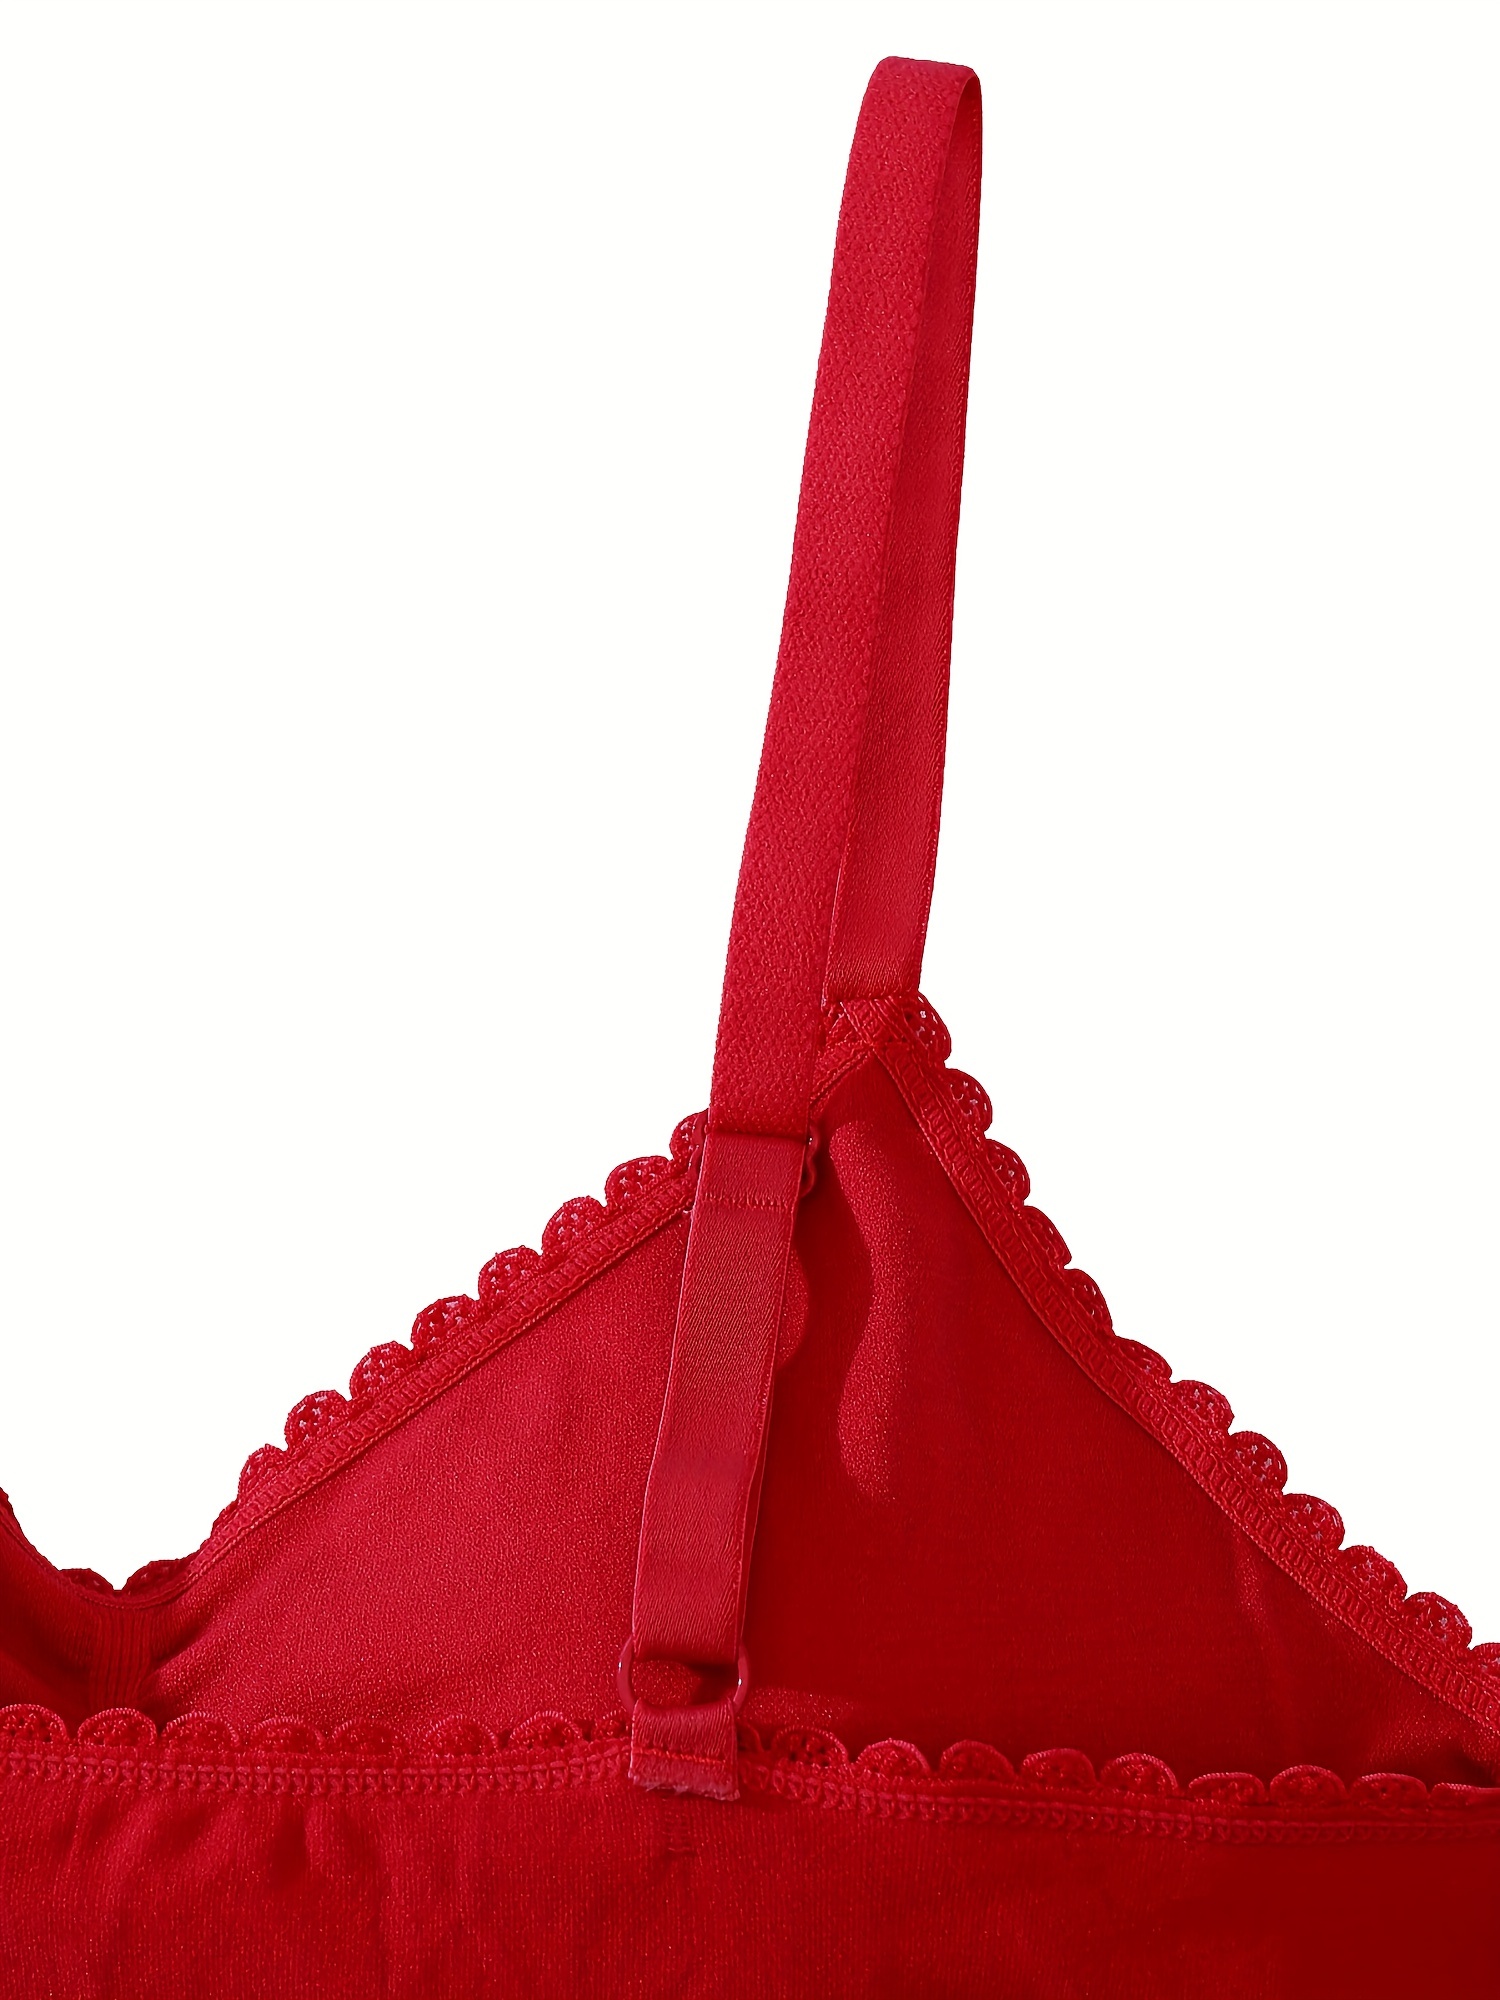 B91xZ Cotton Stretch Extreme Comfort Bra Pure Comfort Wireless Lace Bralette  Lightly Lined Convertible Bra,Red XXL 